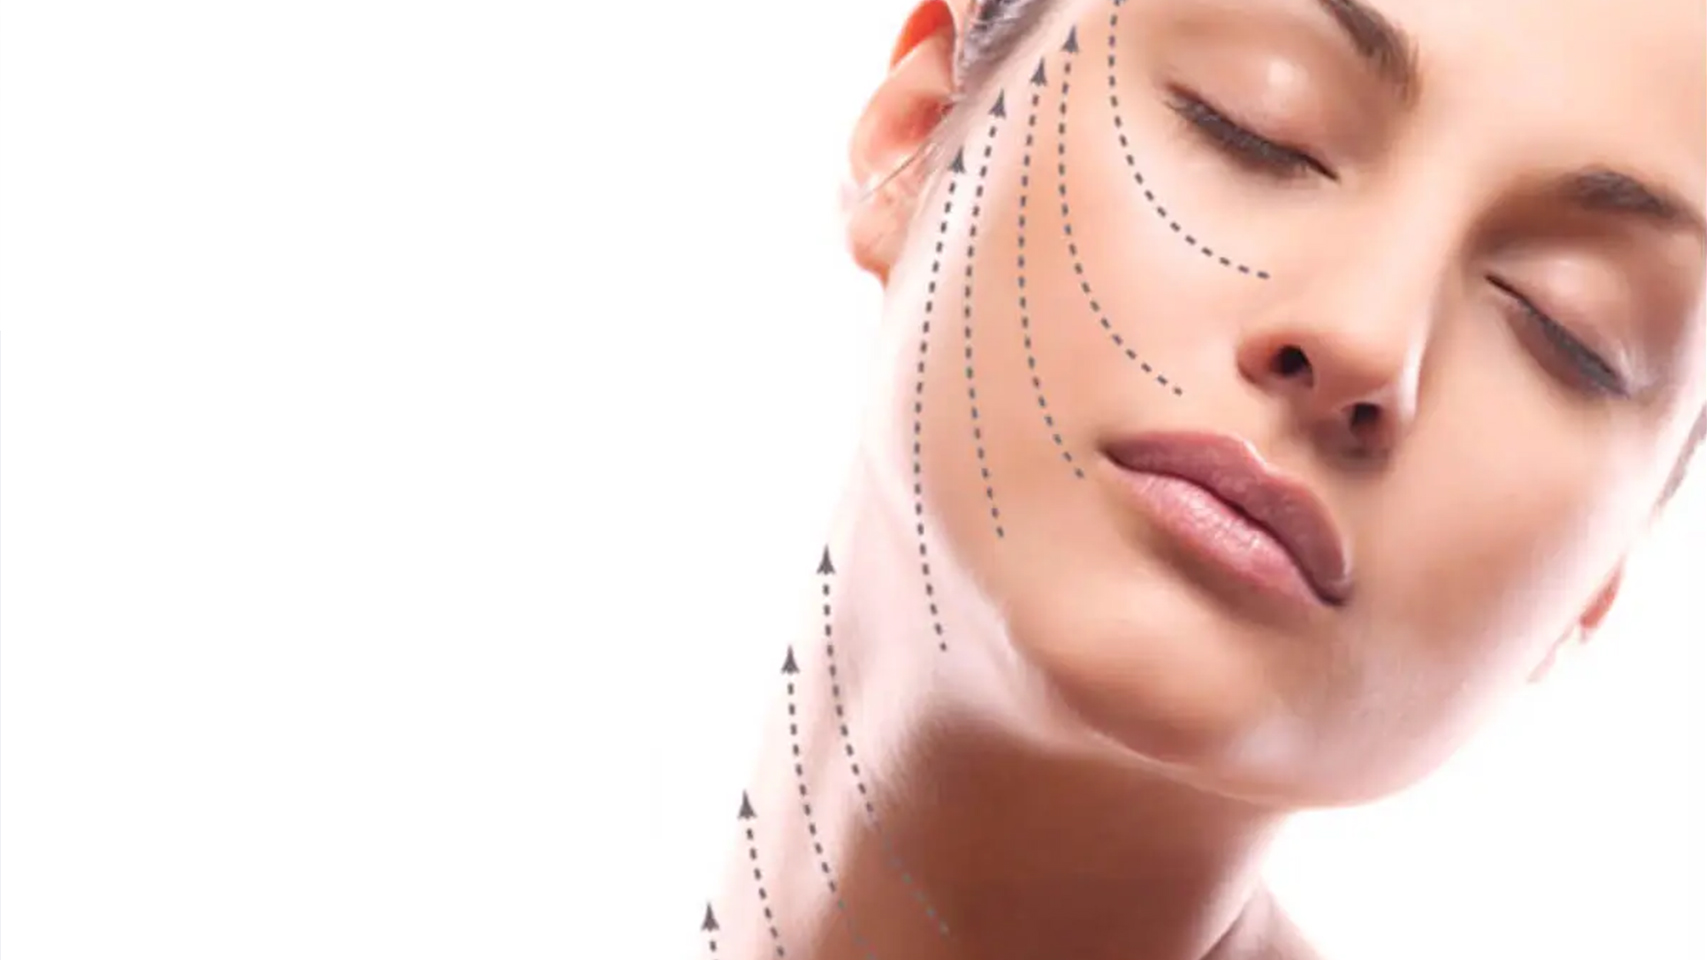 Facial Contouring with Laser——the Next Level of Non-invasive Laser Lift Procedure